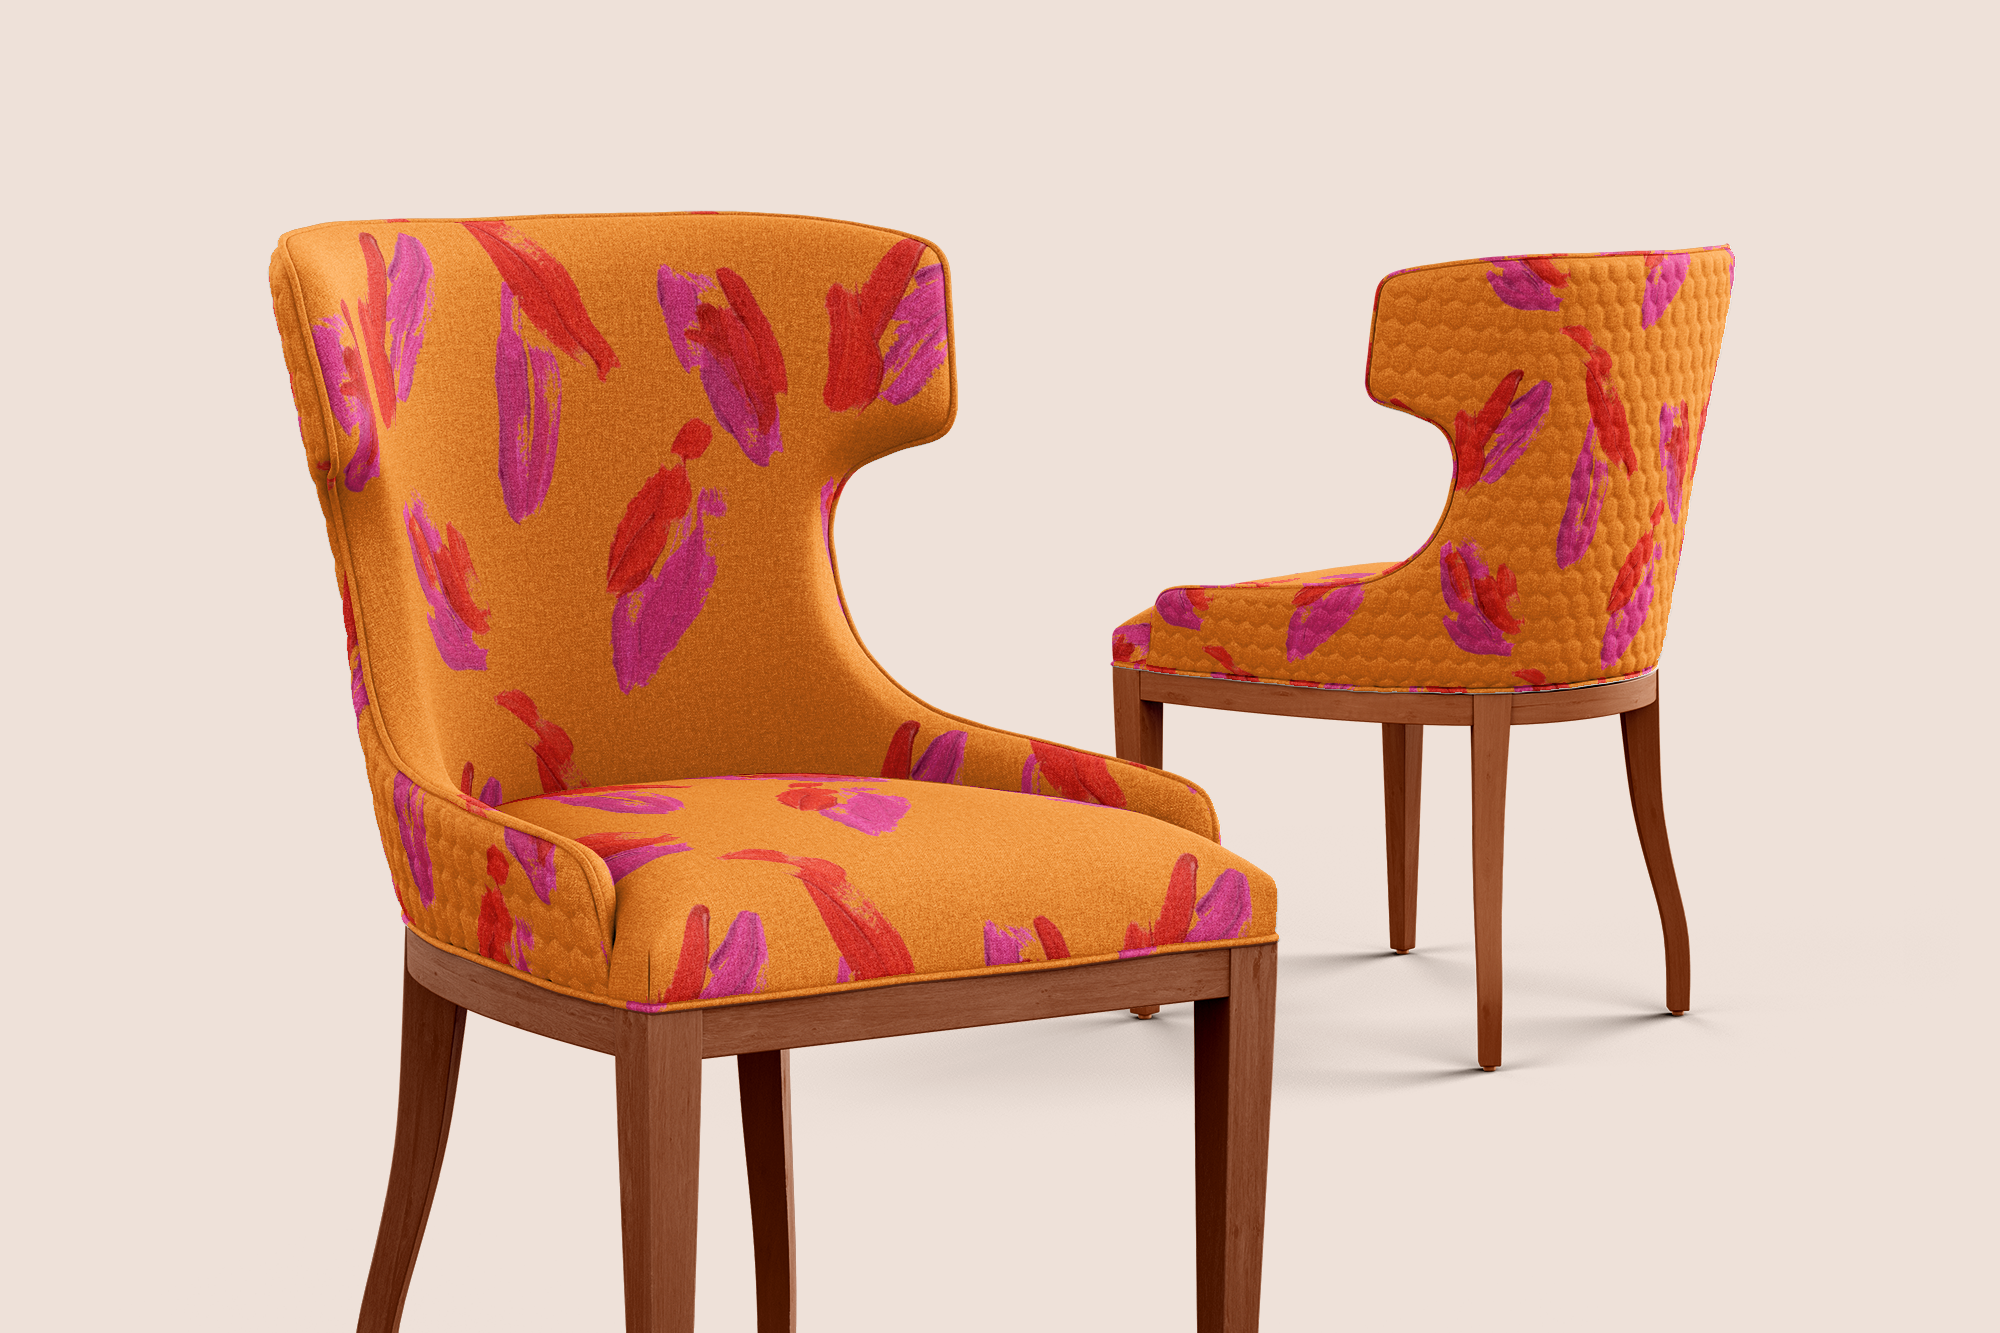 Paint brush strokes red and pink in orange pattern design printed on recycled fabric upholstery mockup